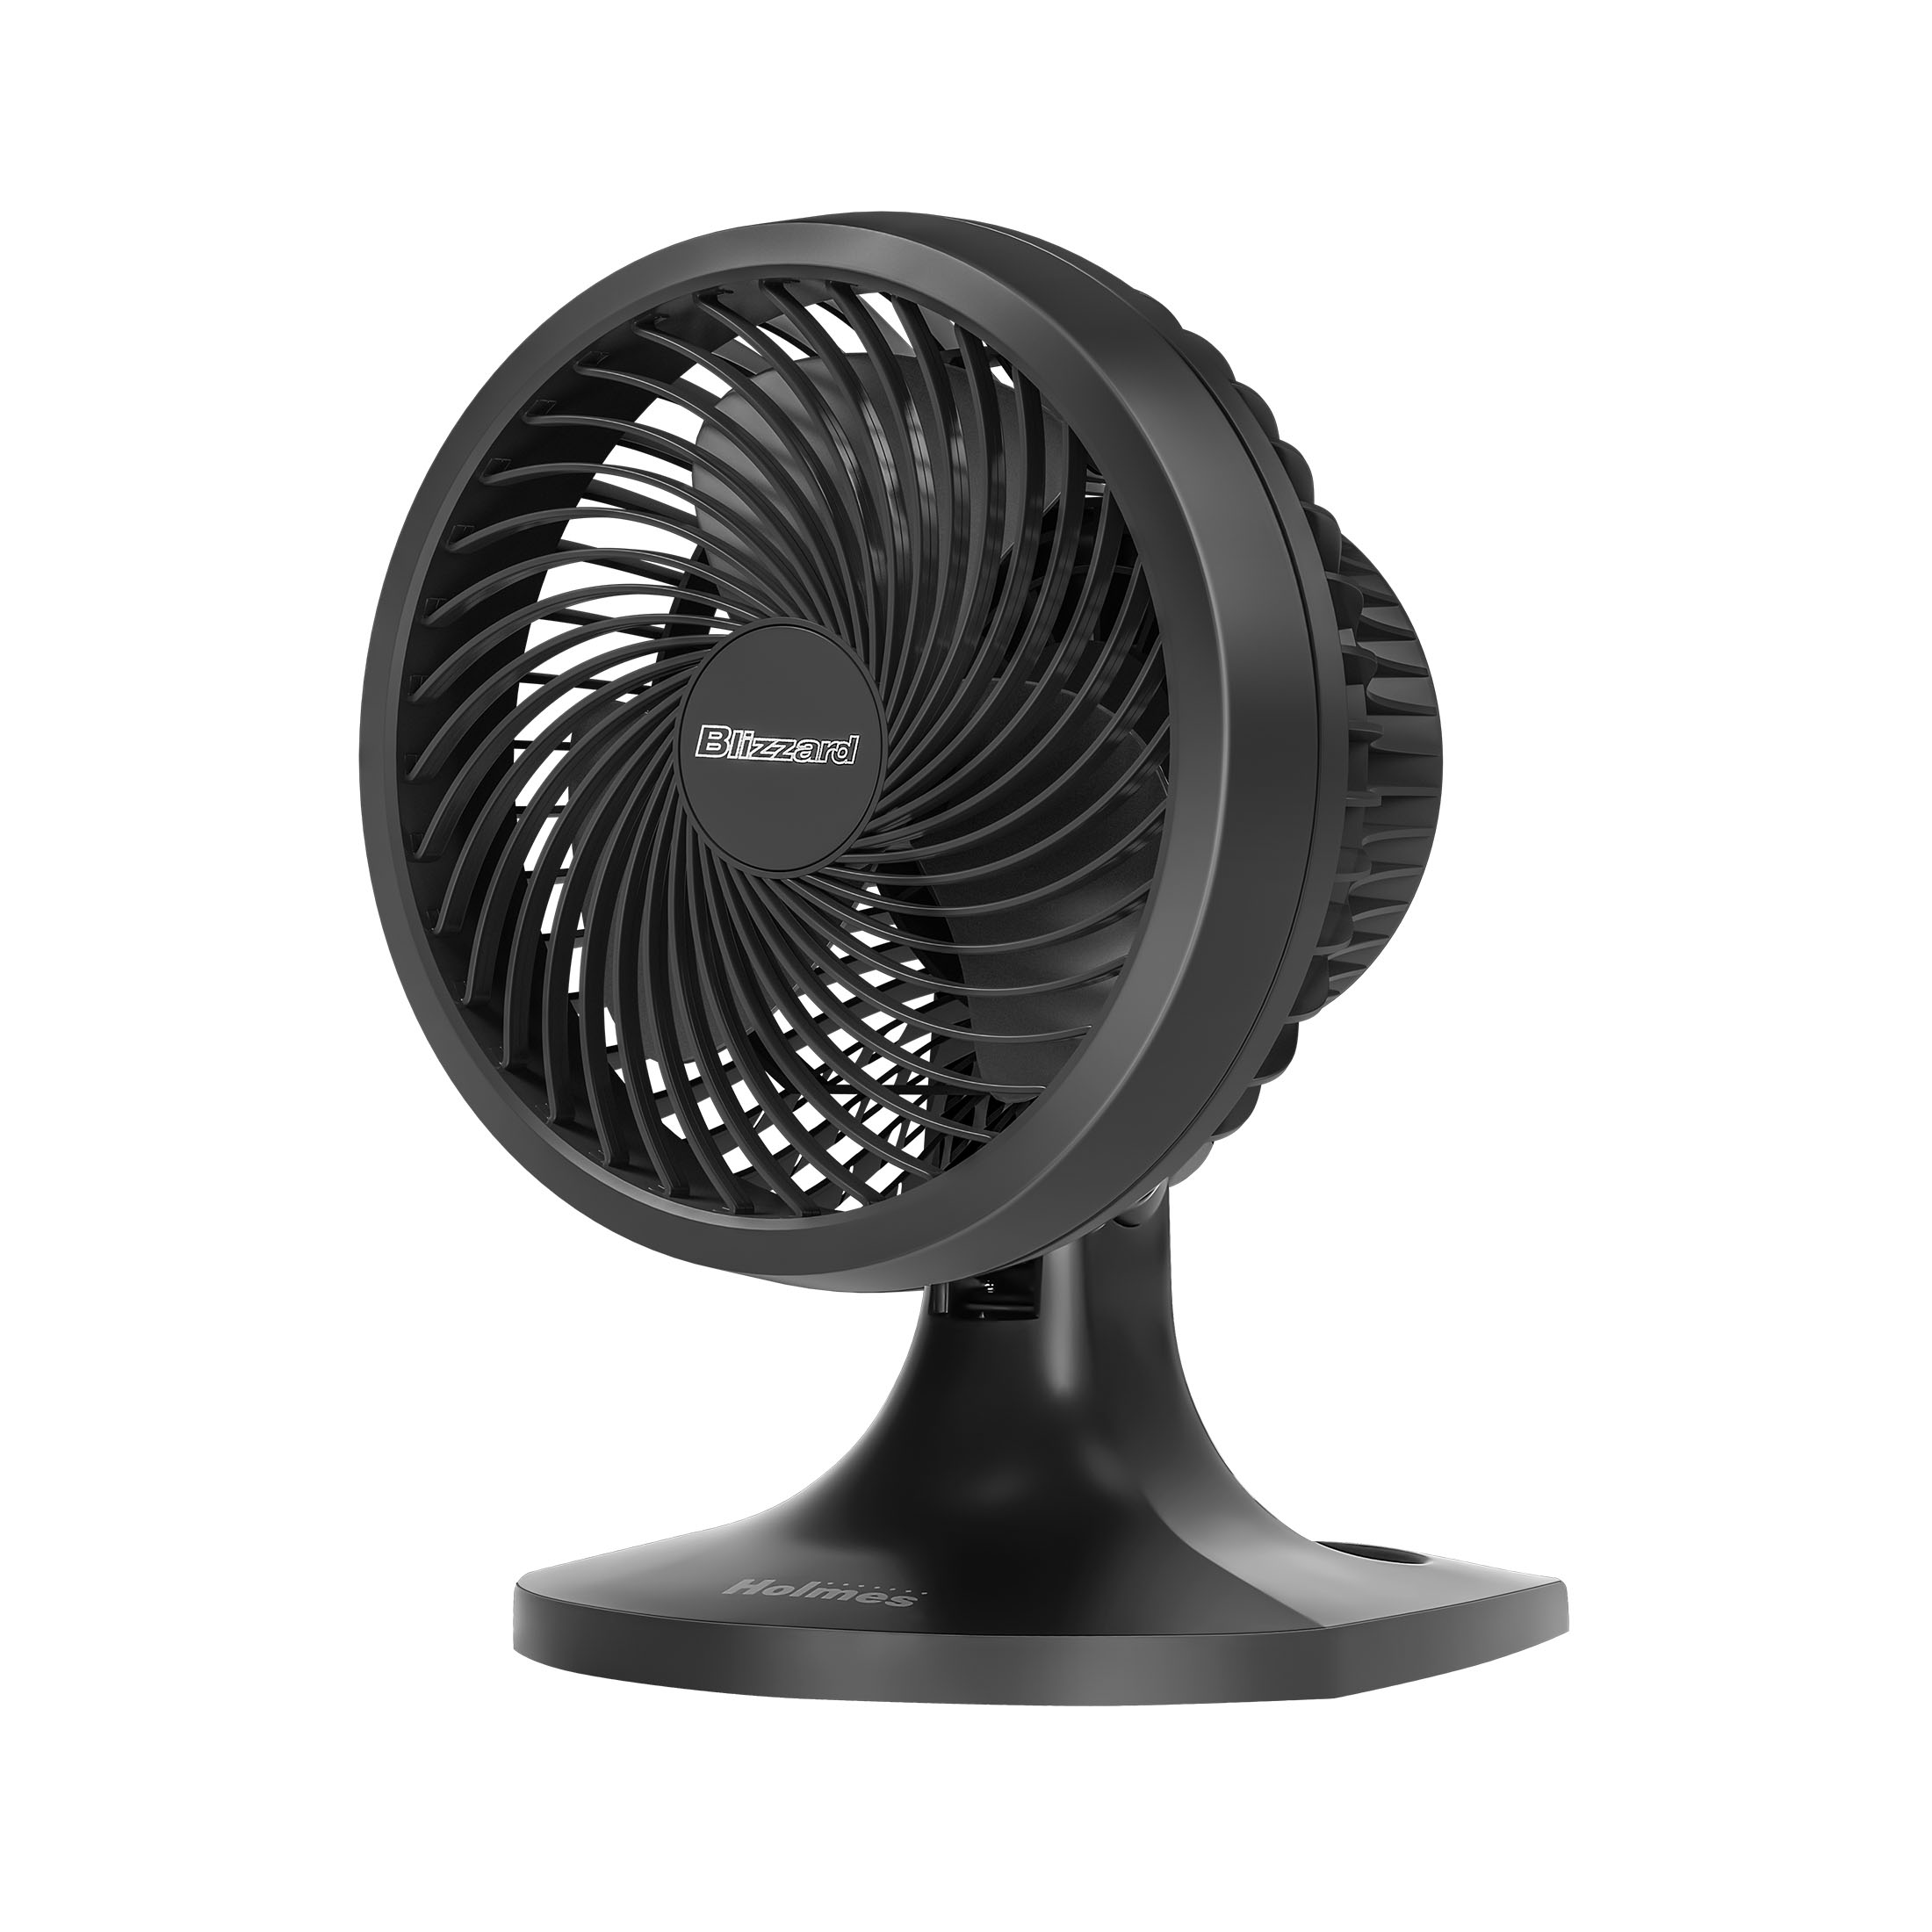 Holmes Blizzard 9 Inch Oscillating Table Fan, 3 Speeds, Wall Mount, Adjustable Head, Charcoal - image 1 of 9